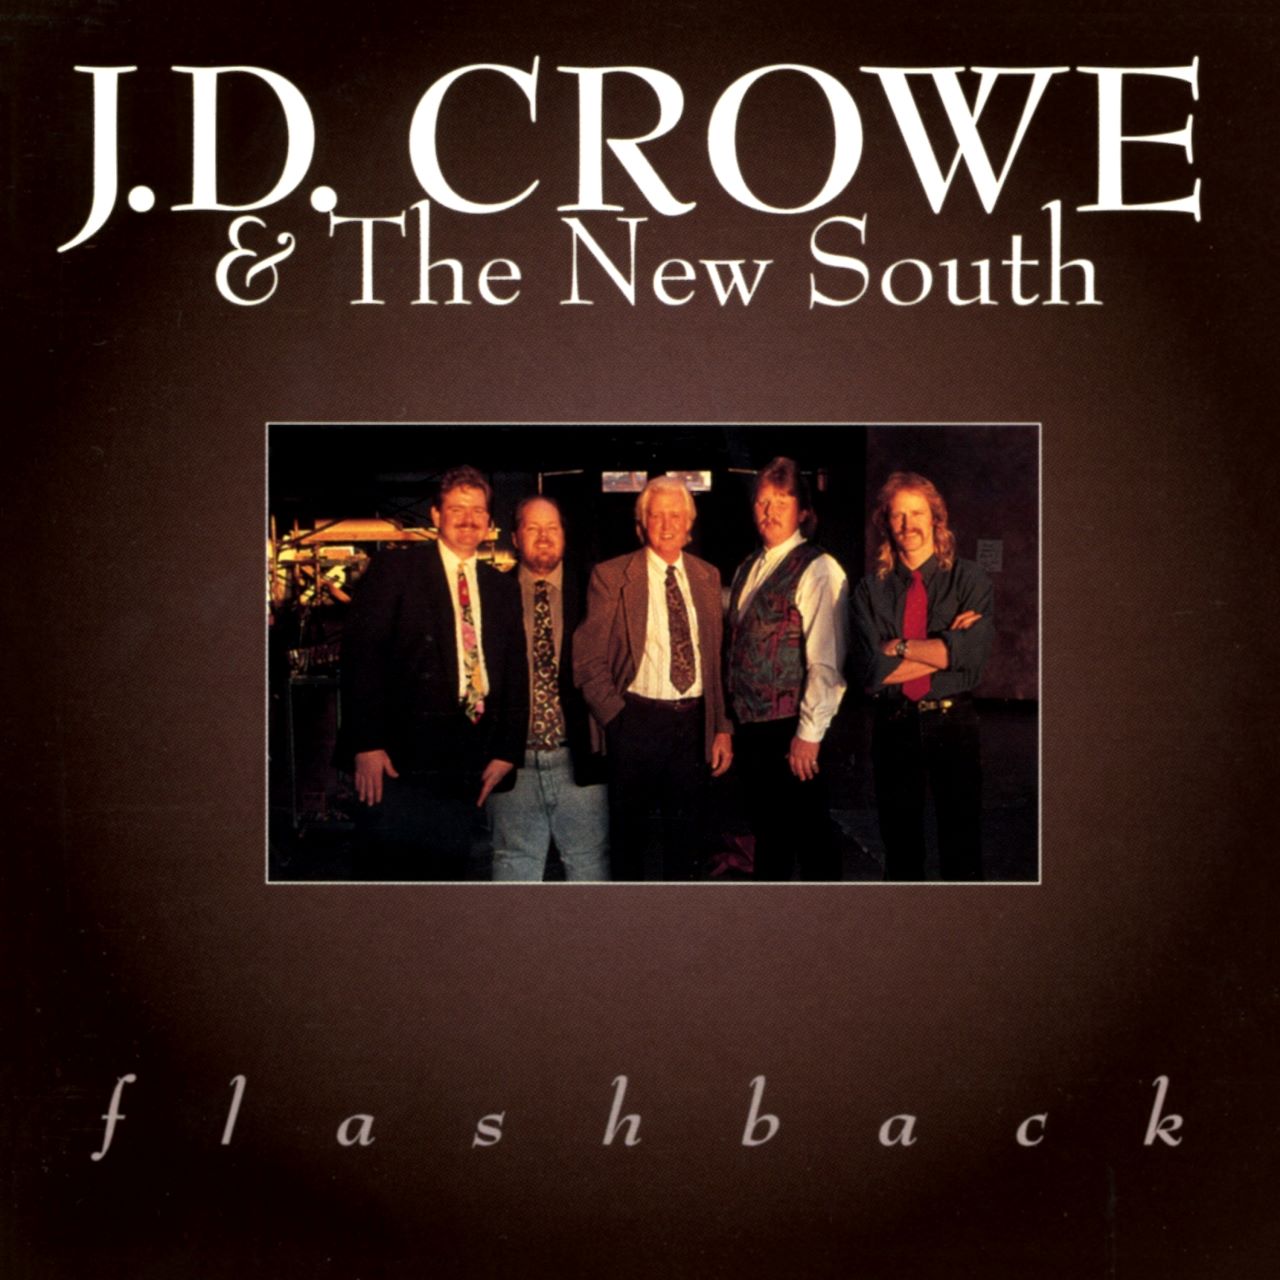 J.D. Crowe & The New South - Flashback cover album